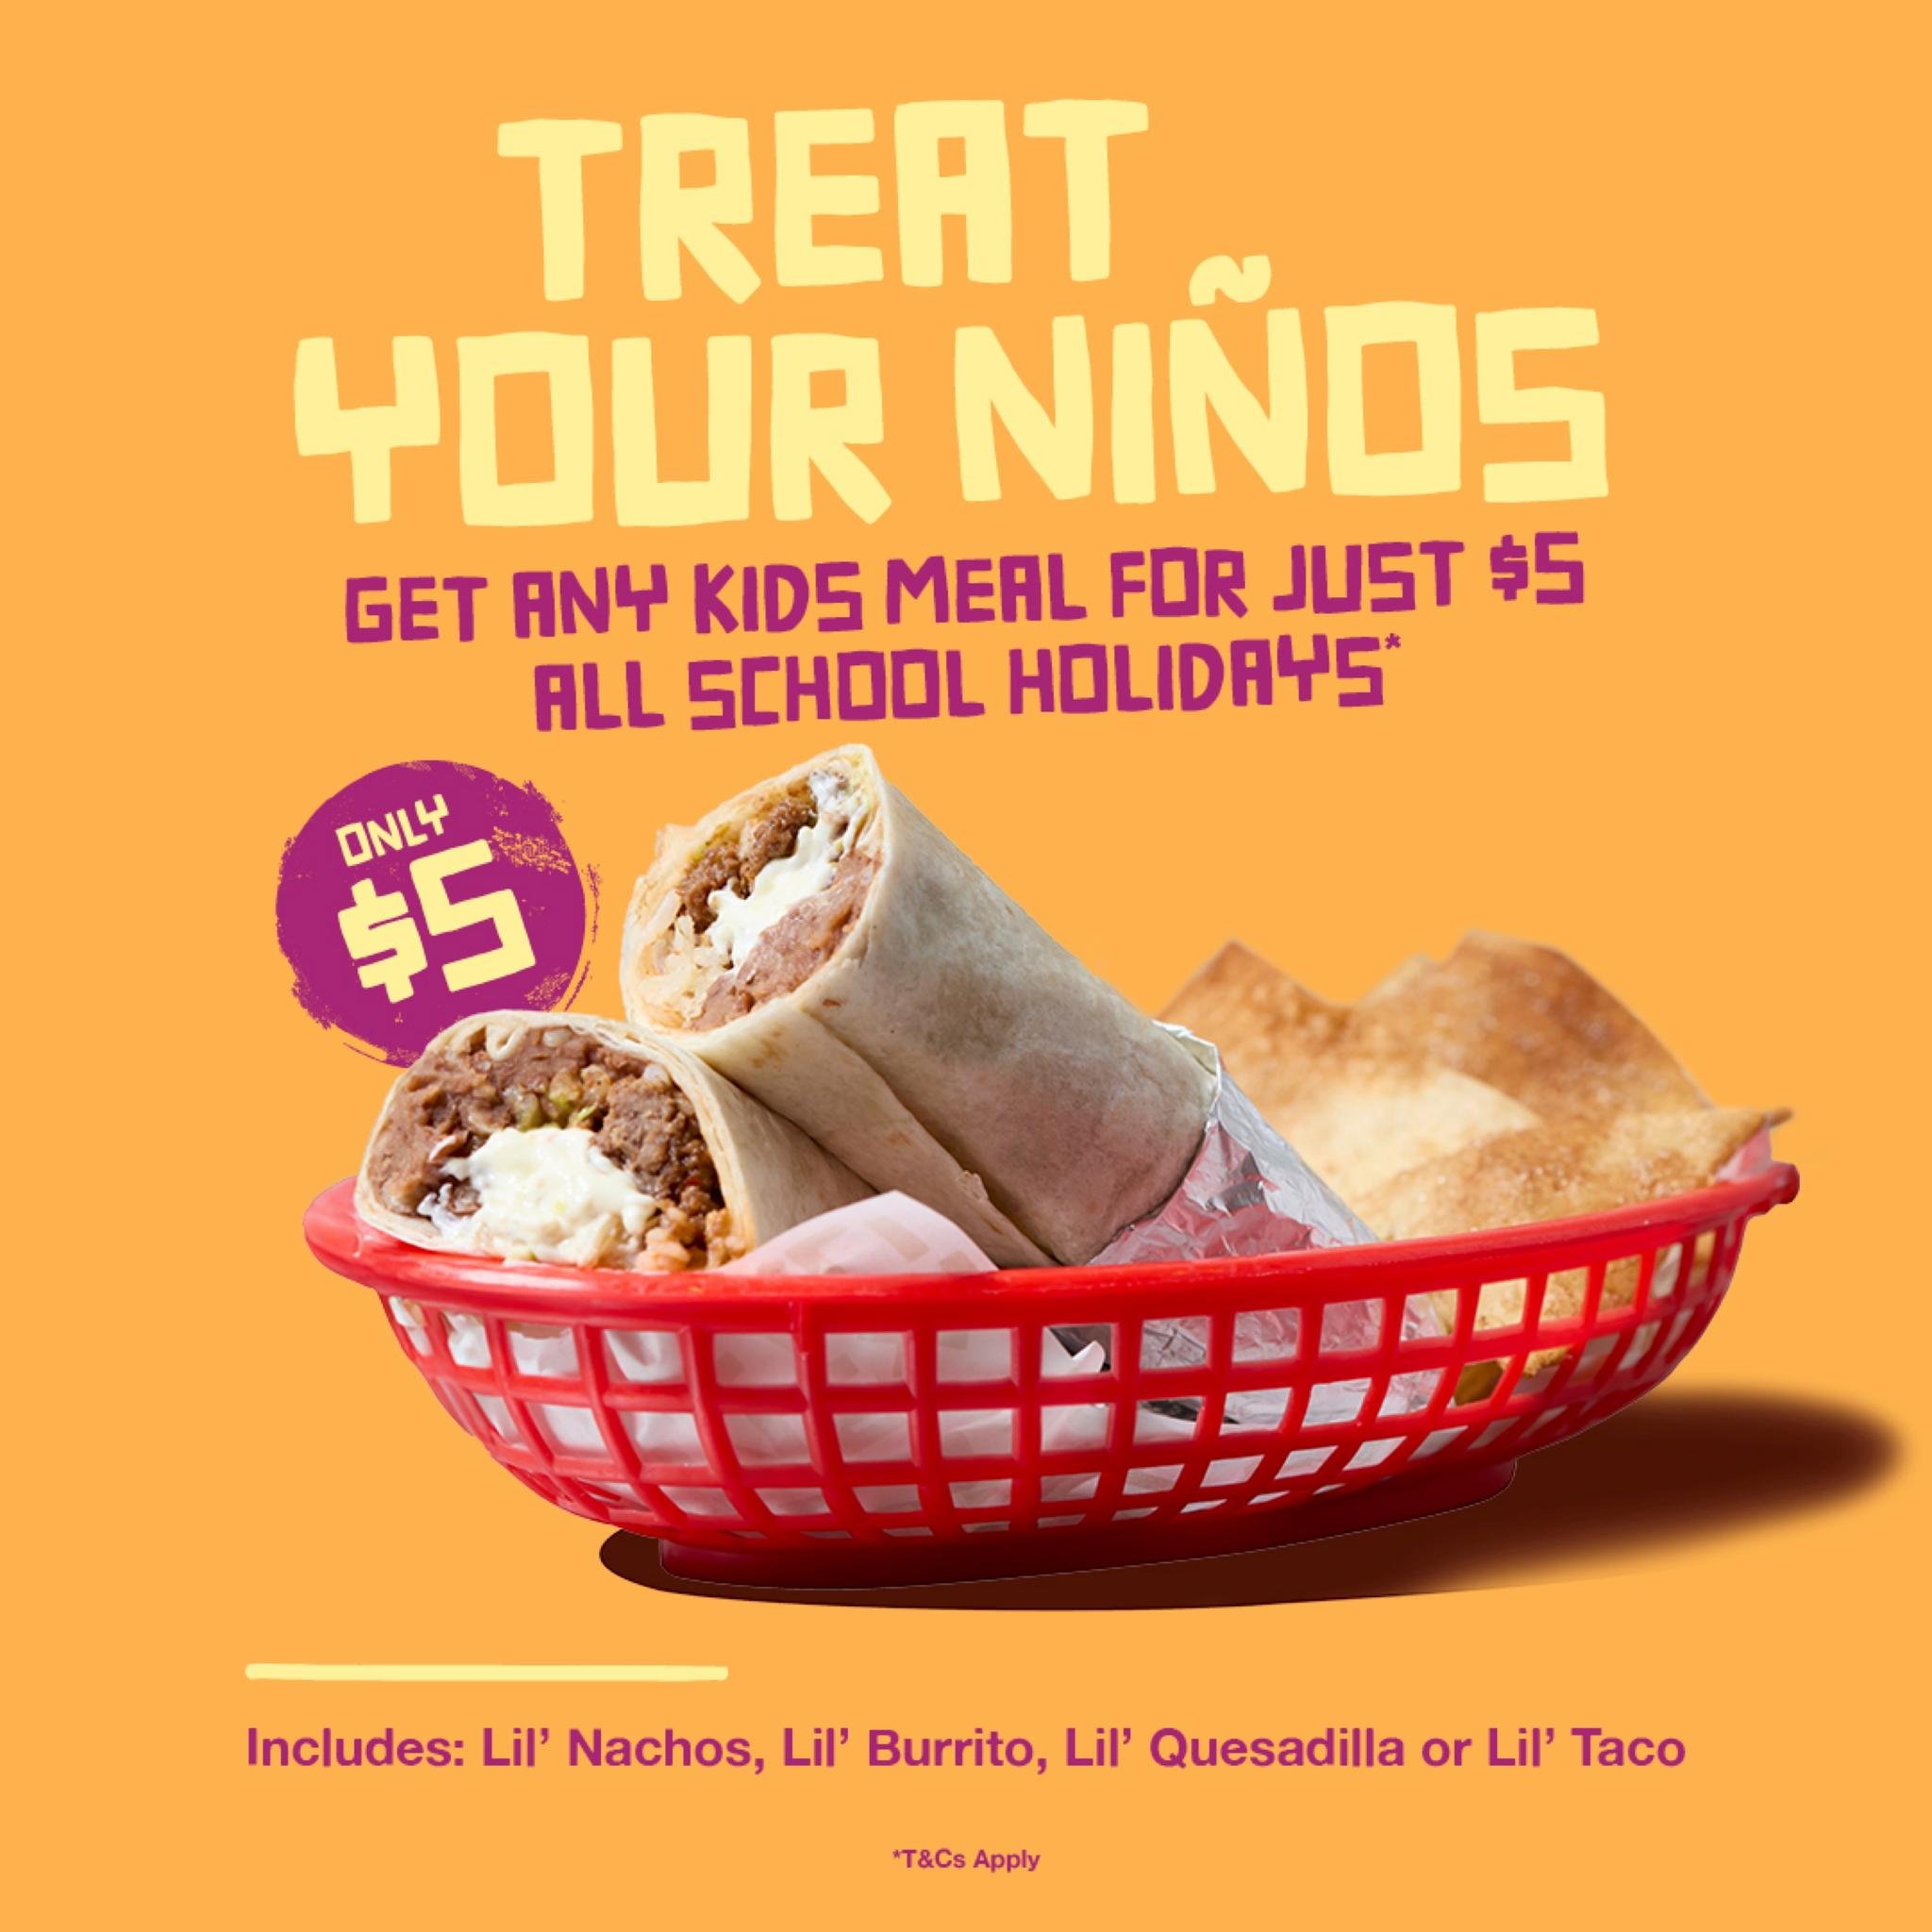 Roll into Mexi during these school holidays and enjoy any Kids Meal for just $5! Kids can choose from Lil' Nachos, Lil' Burrito, Lil' Quesadilla or a Lil' Taco. To redeem simply mention the offer in-store or add the coupon to your cart online📱

#kid